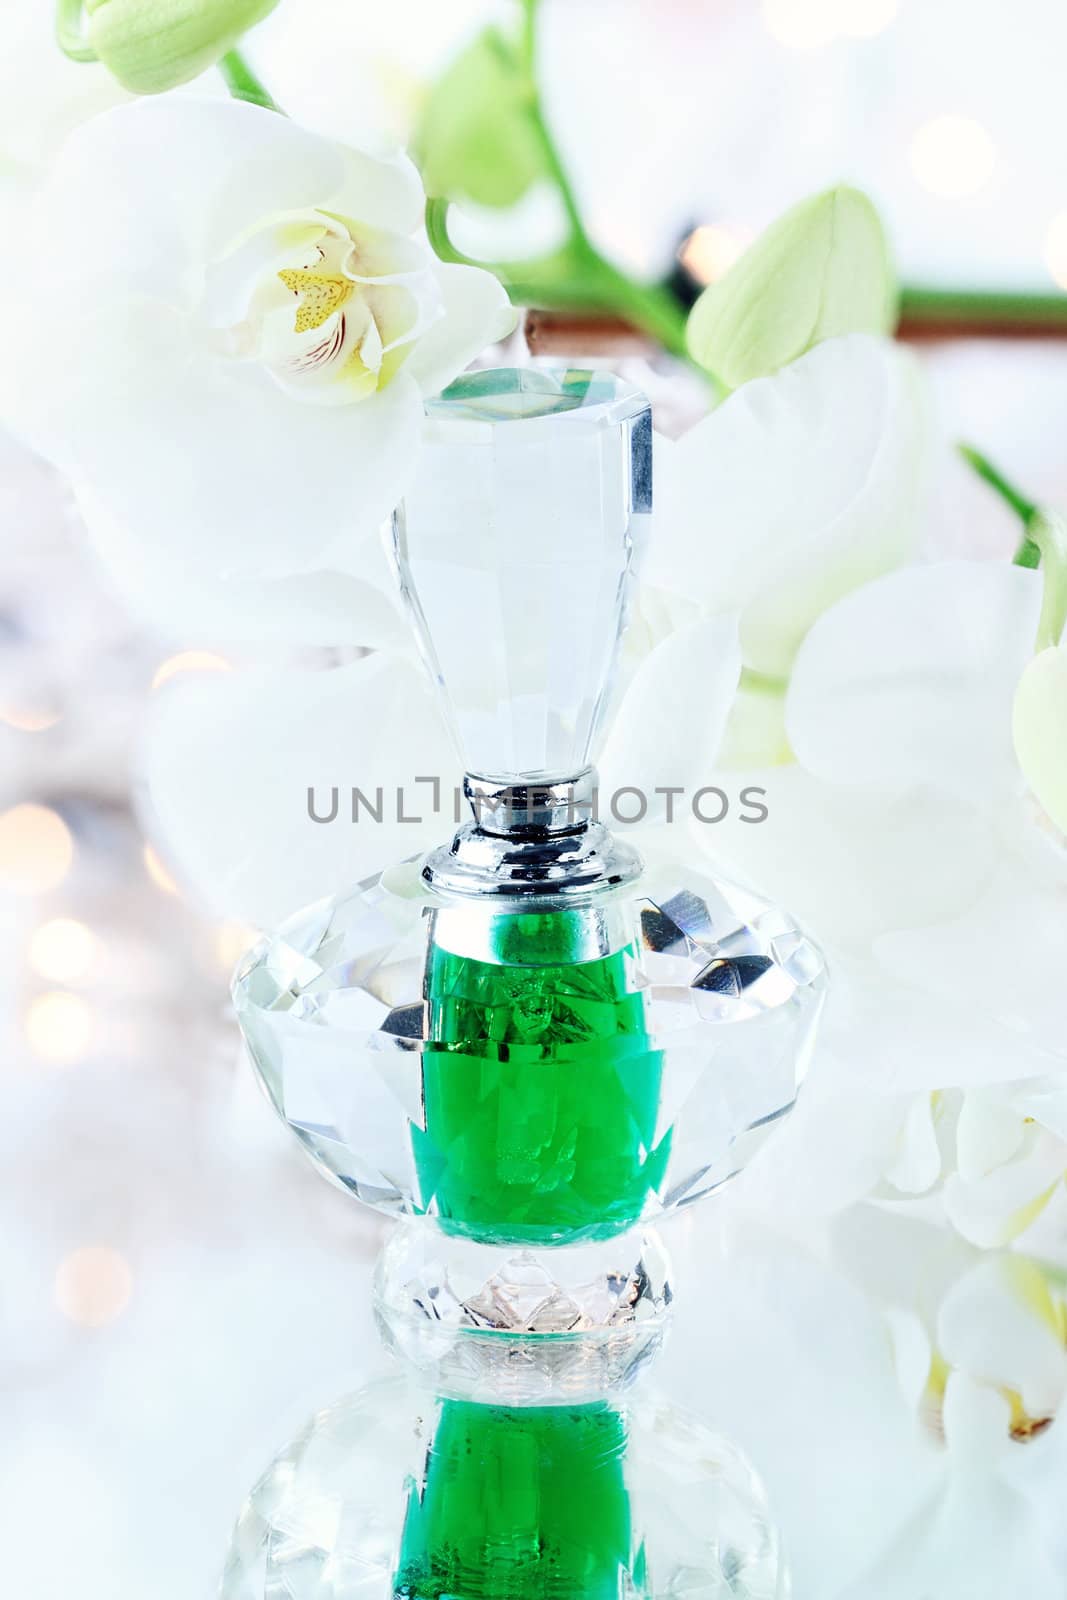 White Orchid and Perfume or Essence by StephanieFrey